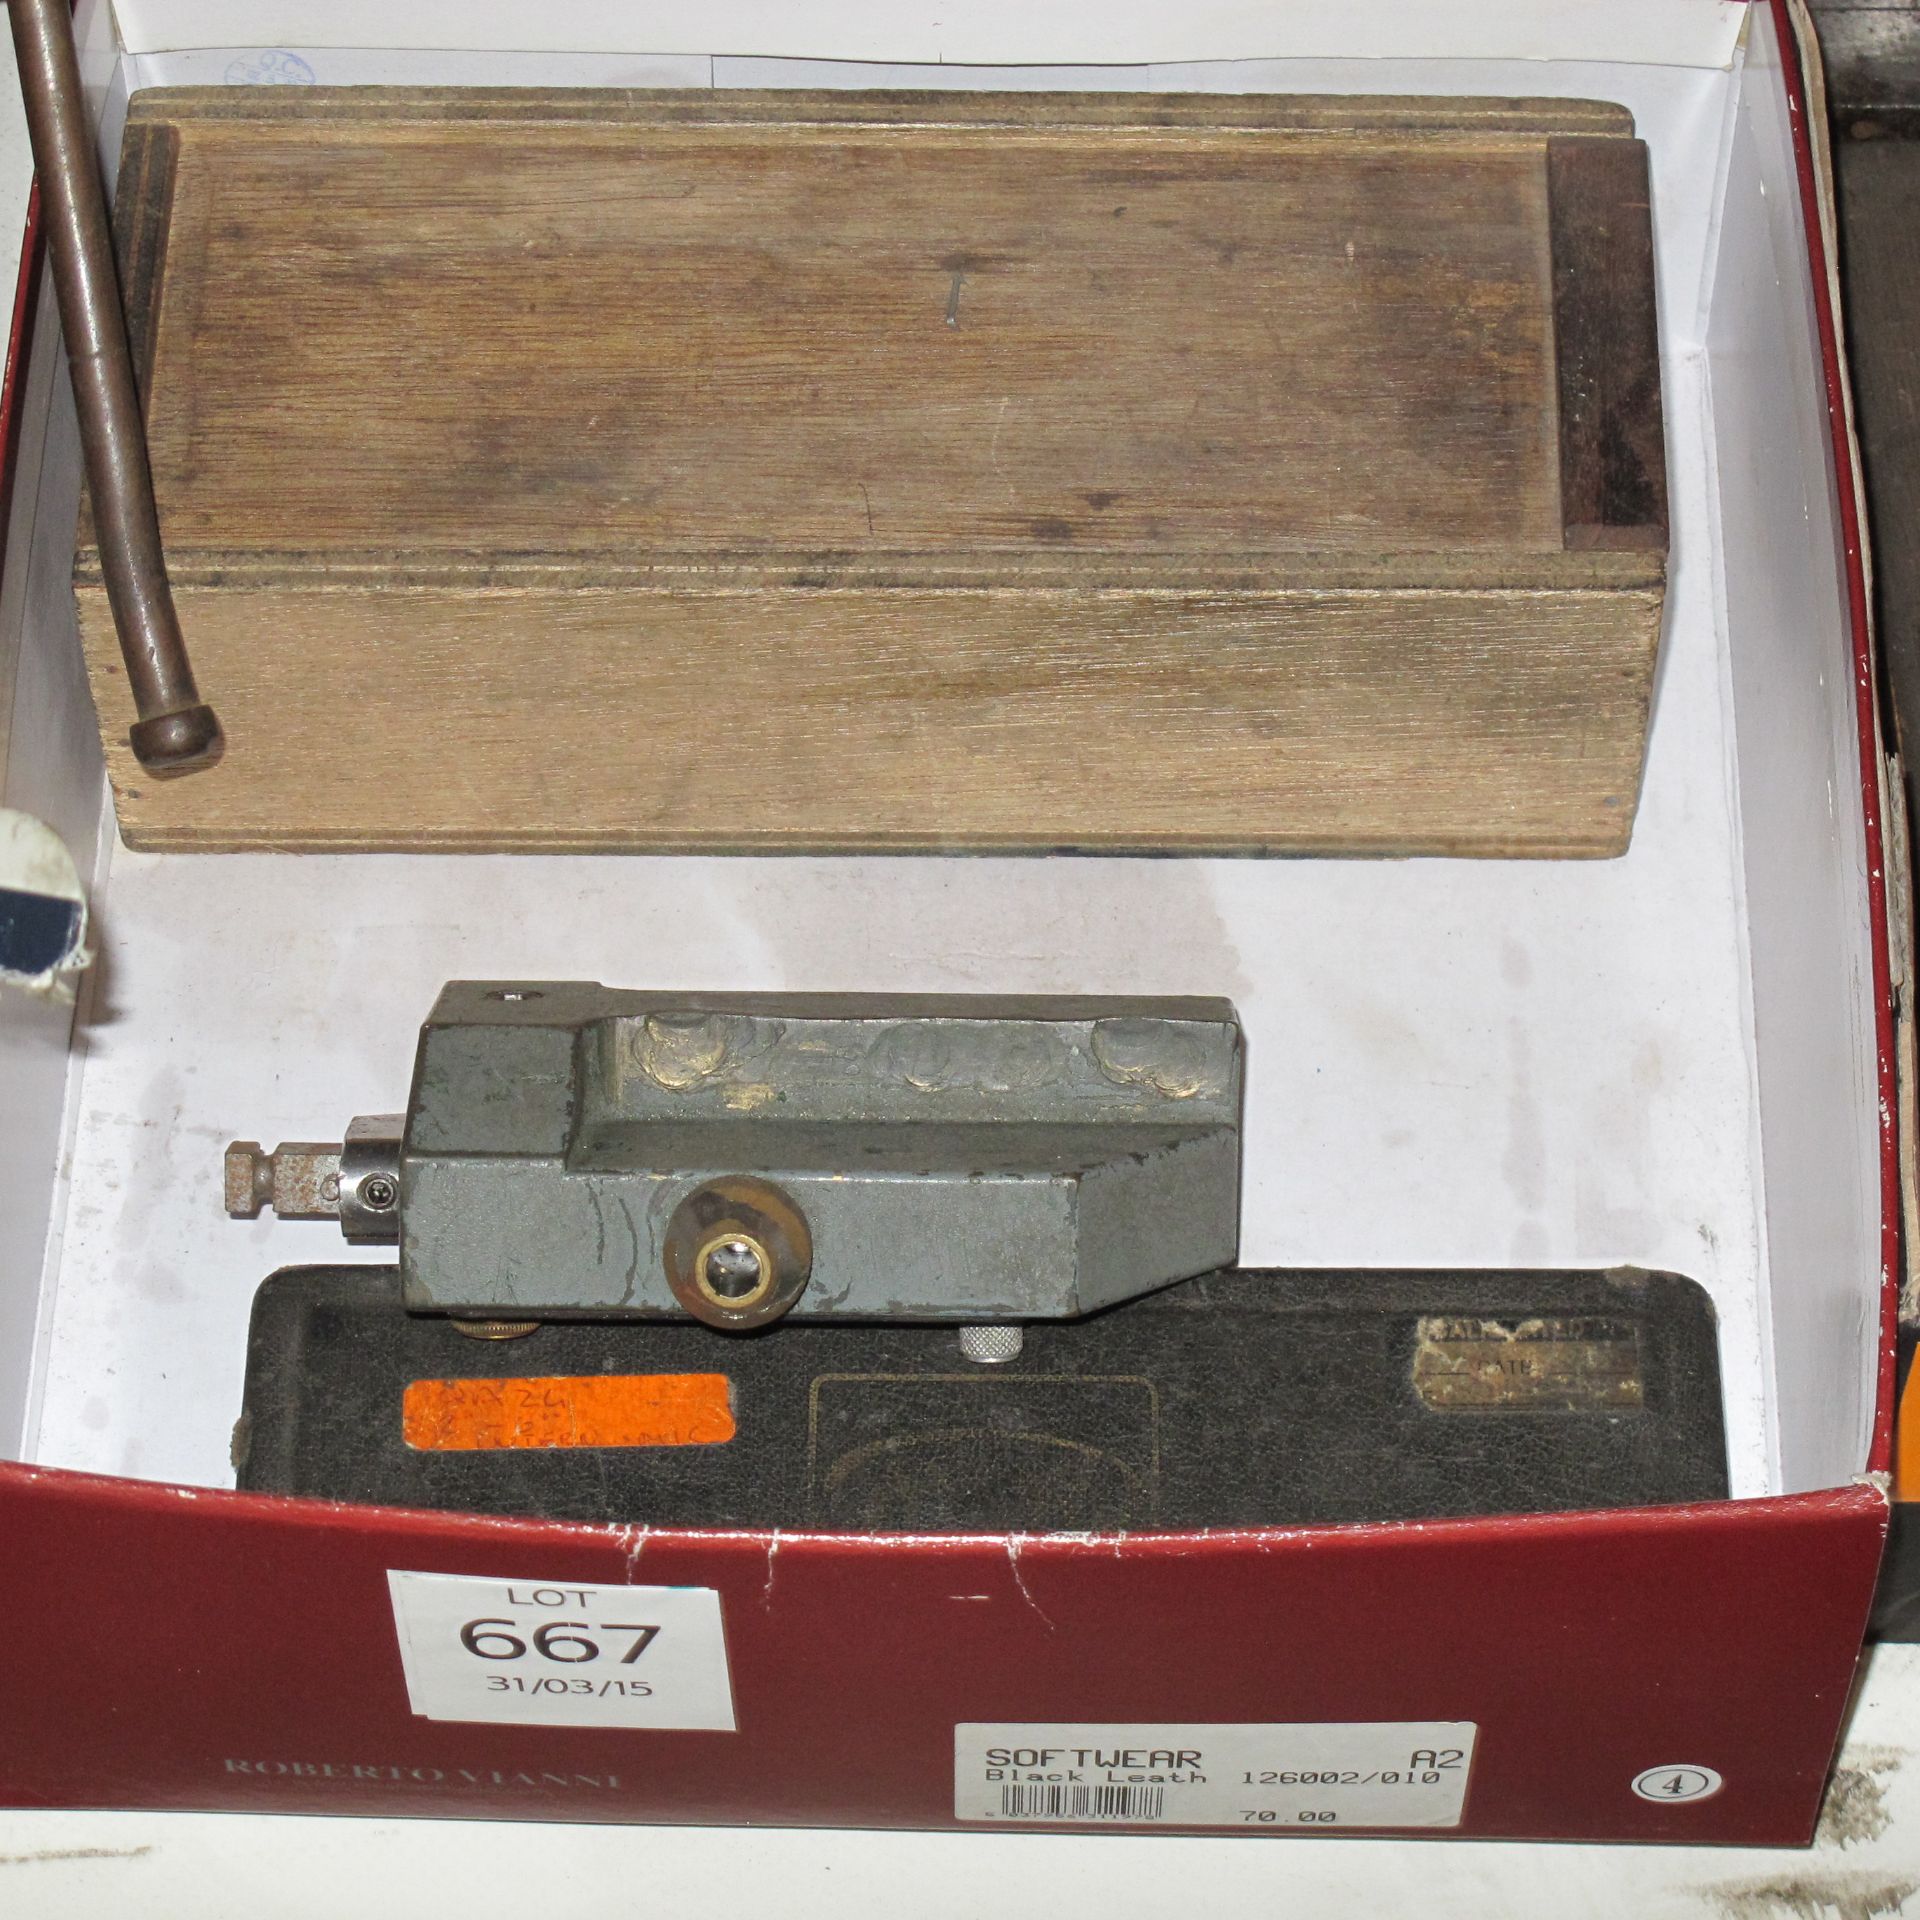 * Starret 8'' Engineers Level, Moore and Wright 2 x 8 Internal Micrometer set and Croydon Lathe Tool